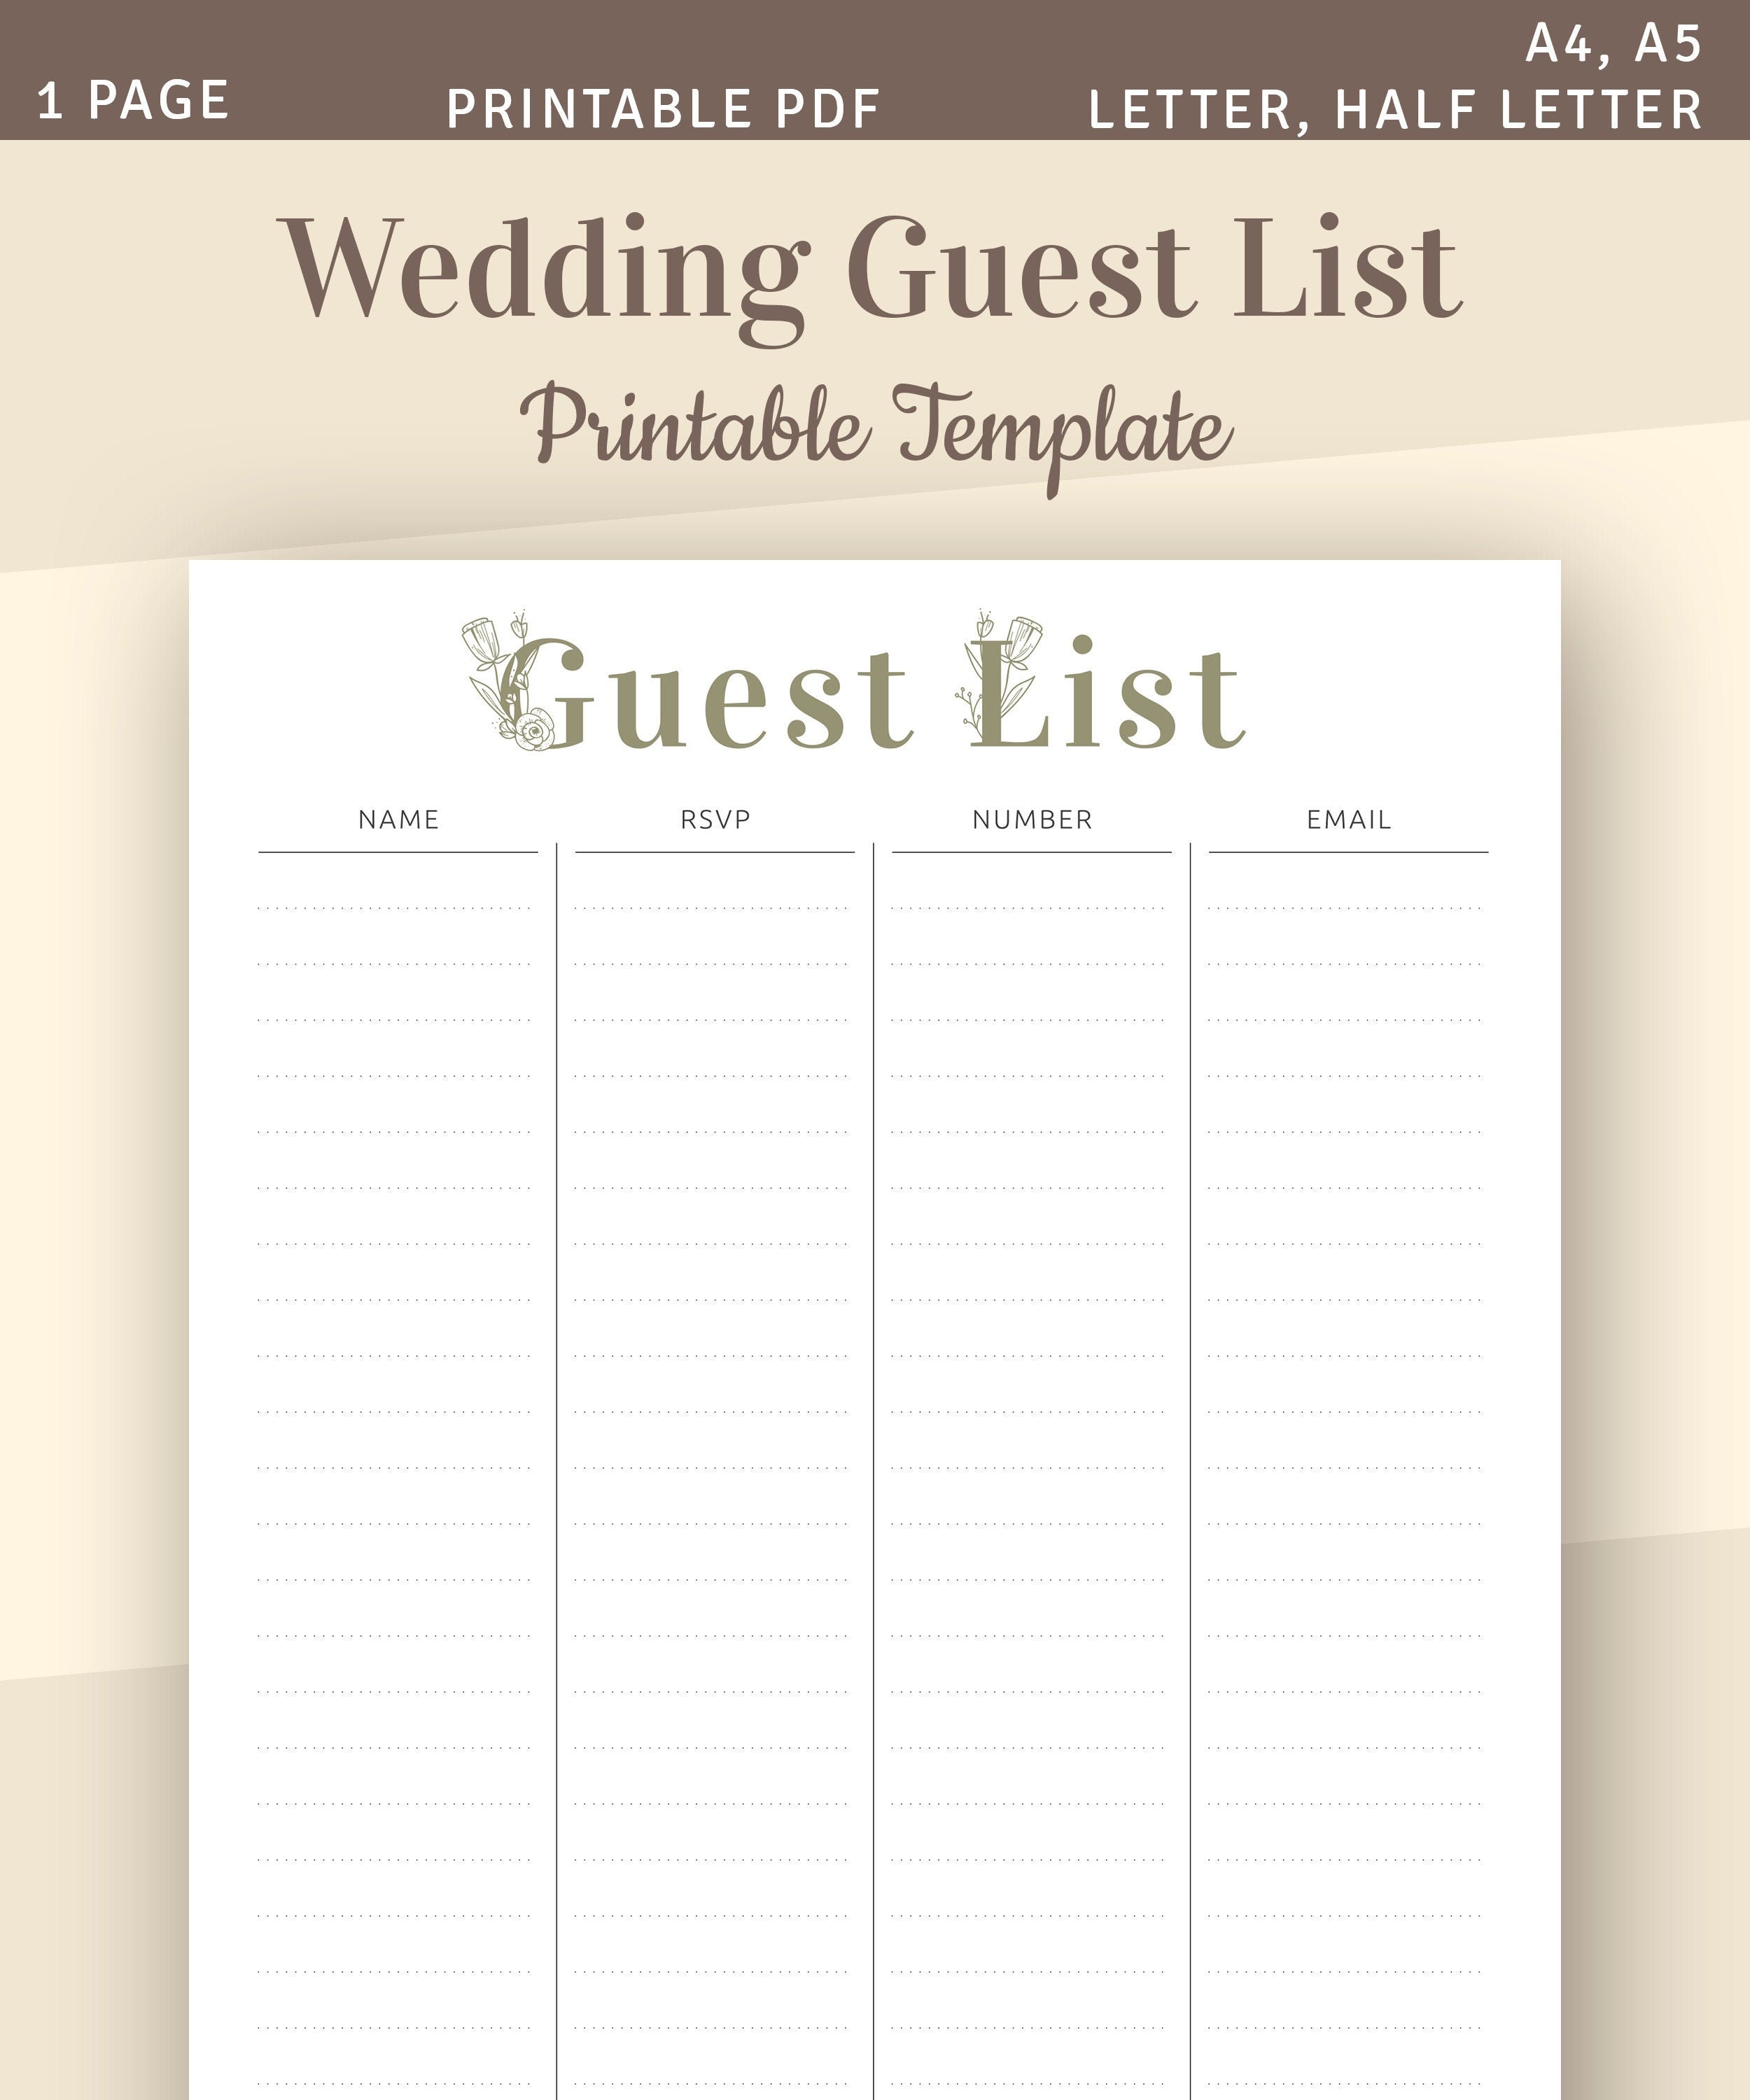 personalized-printable-wedding-guest-list-planner-1sheet-printable